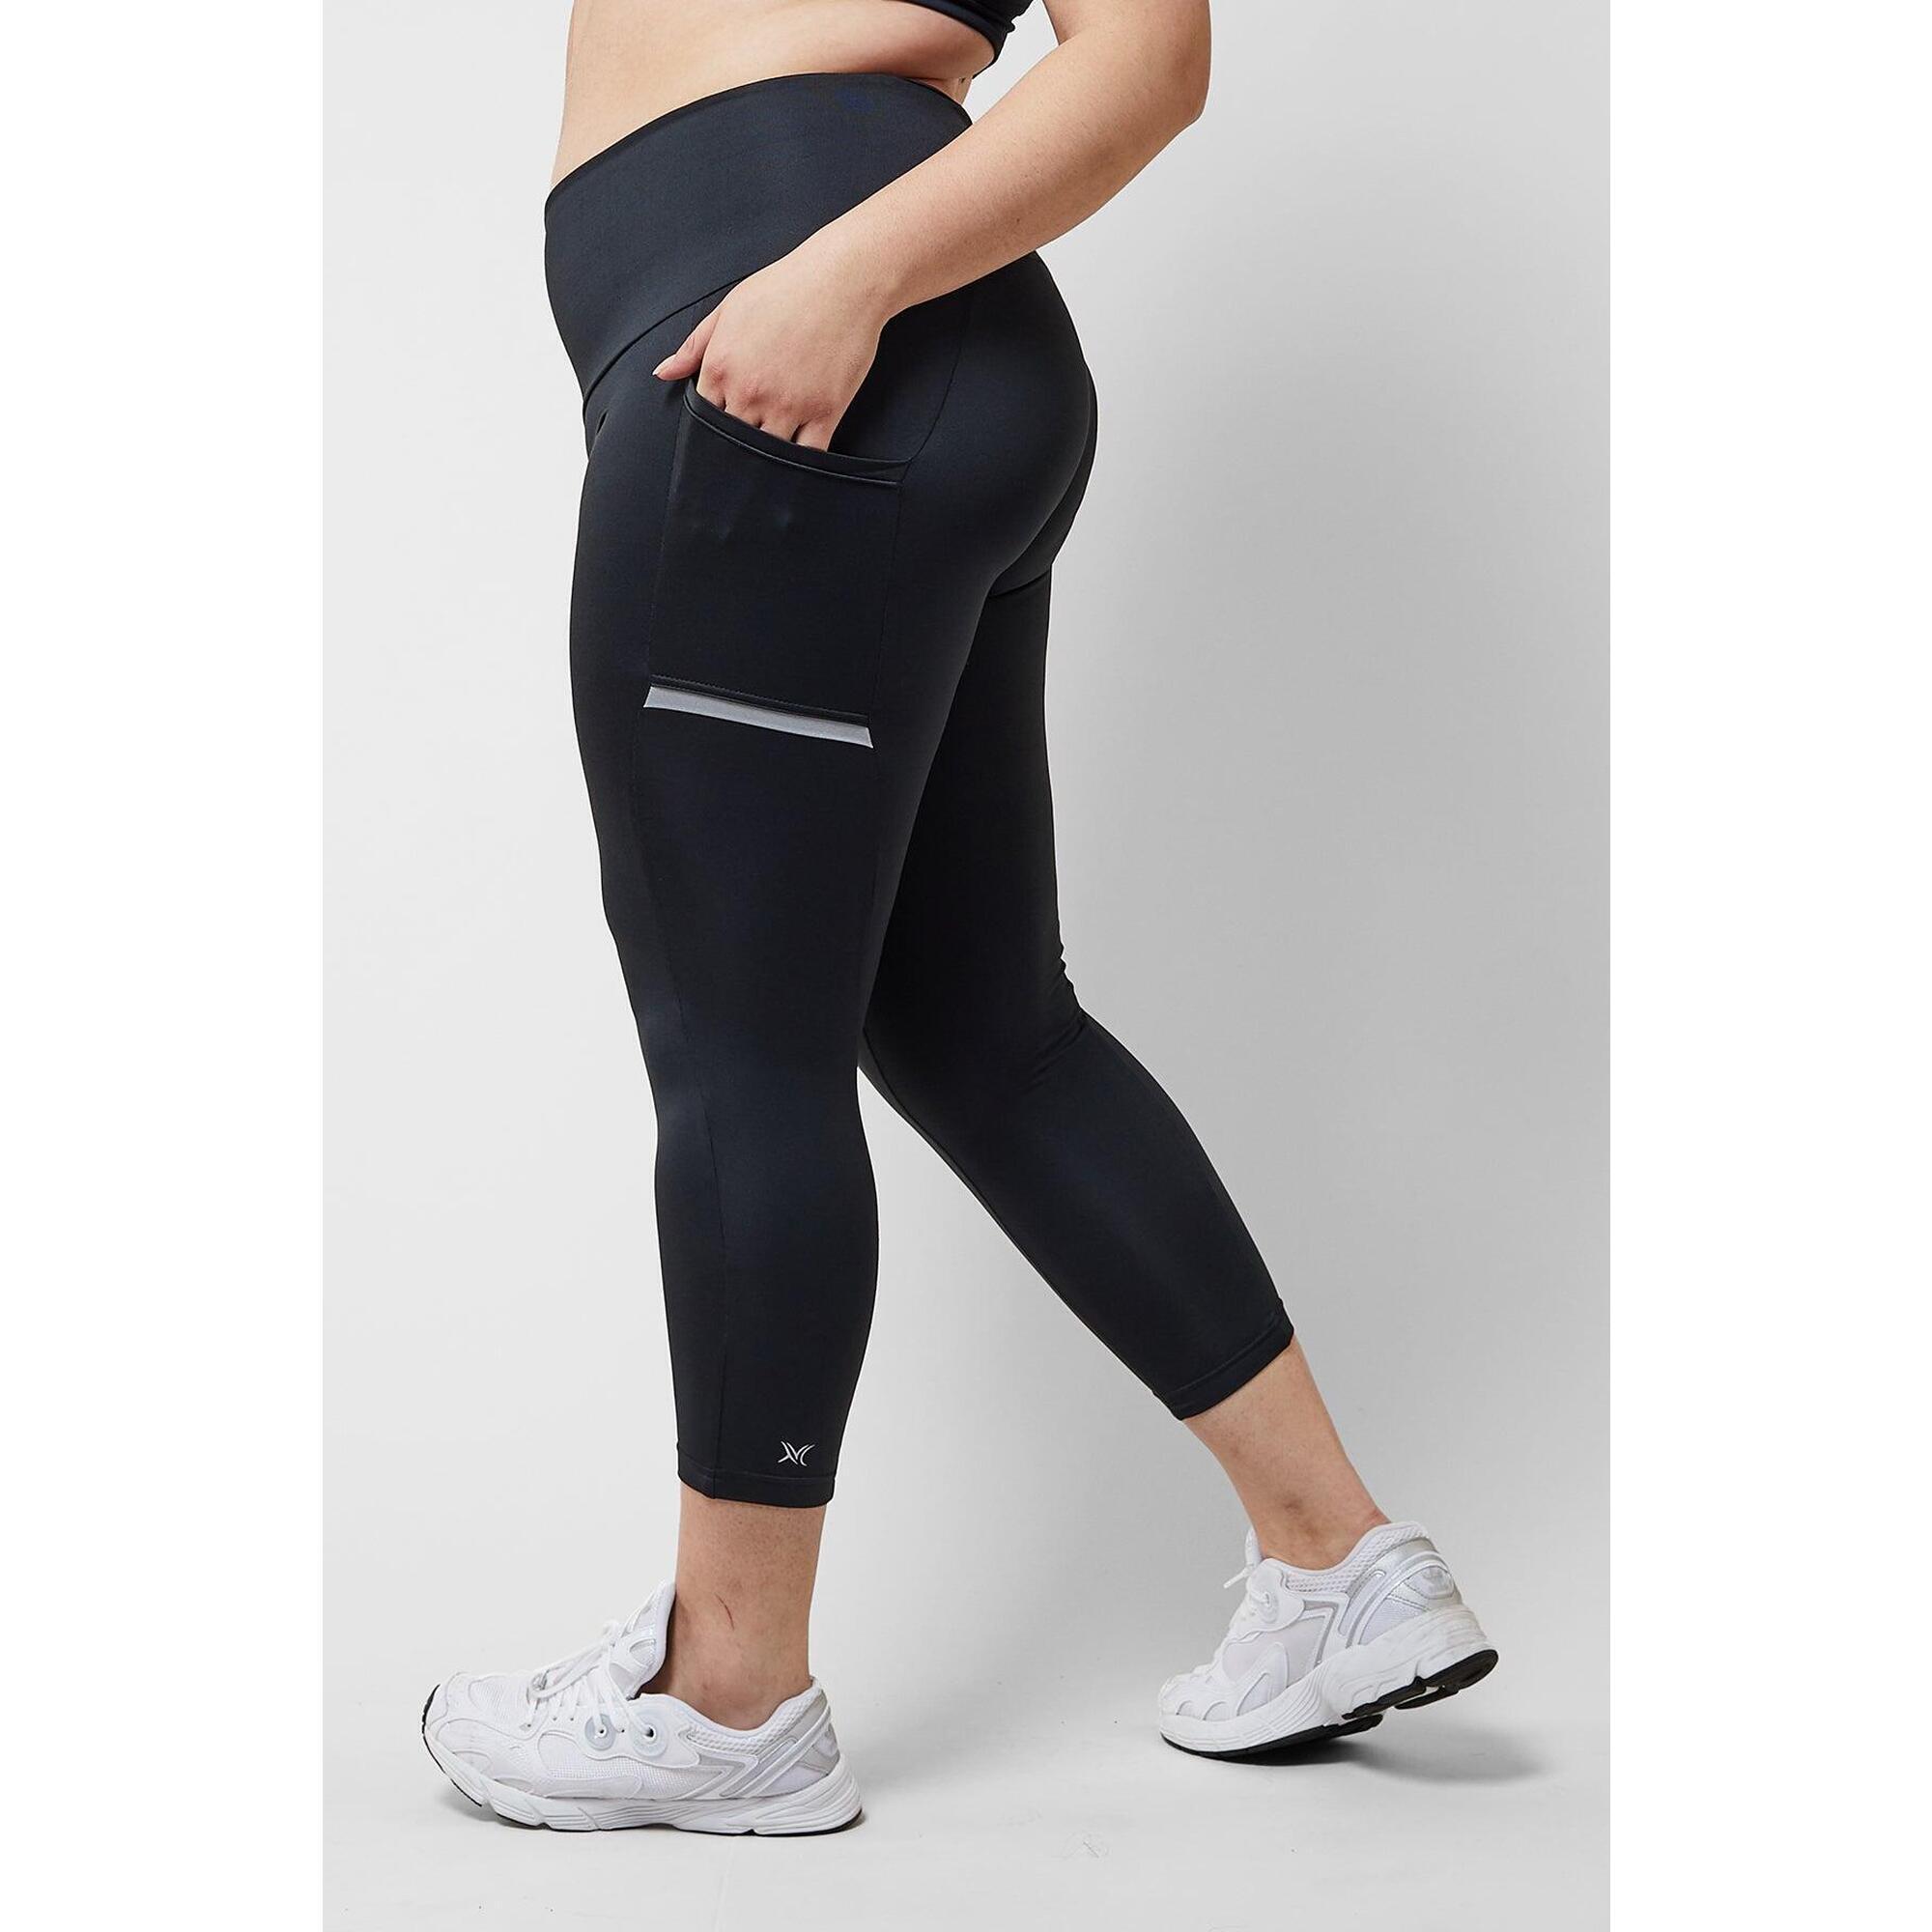 TLC SPORT Reflective Side Pocket Leggings with Thermal Brushed Fabric Black